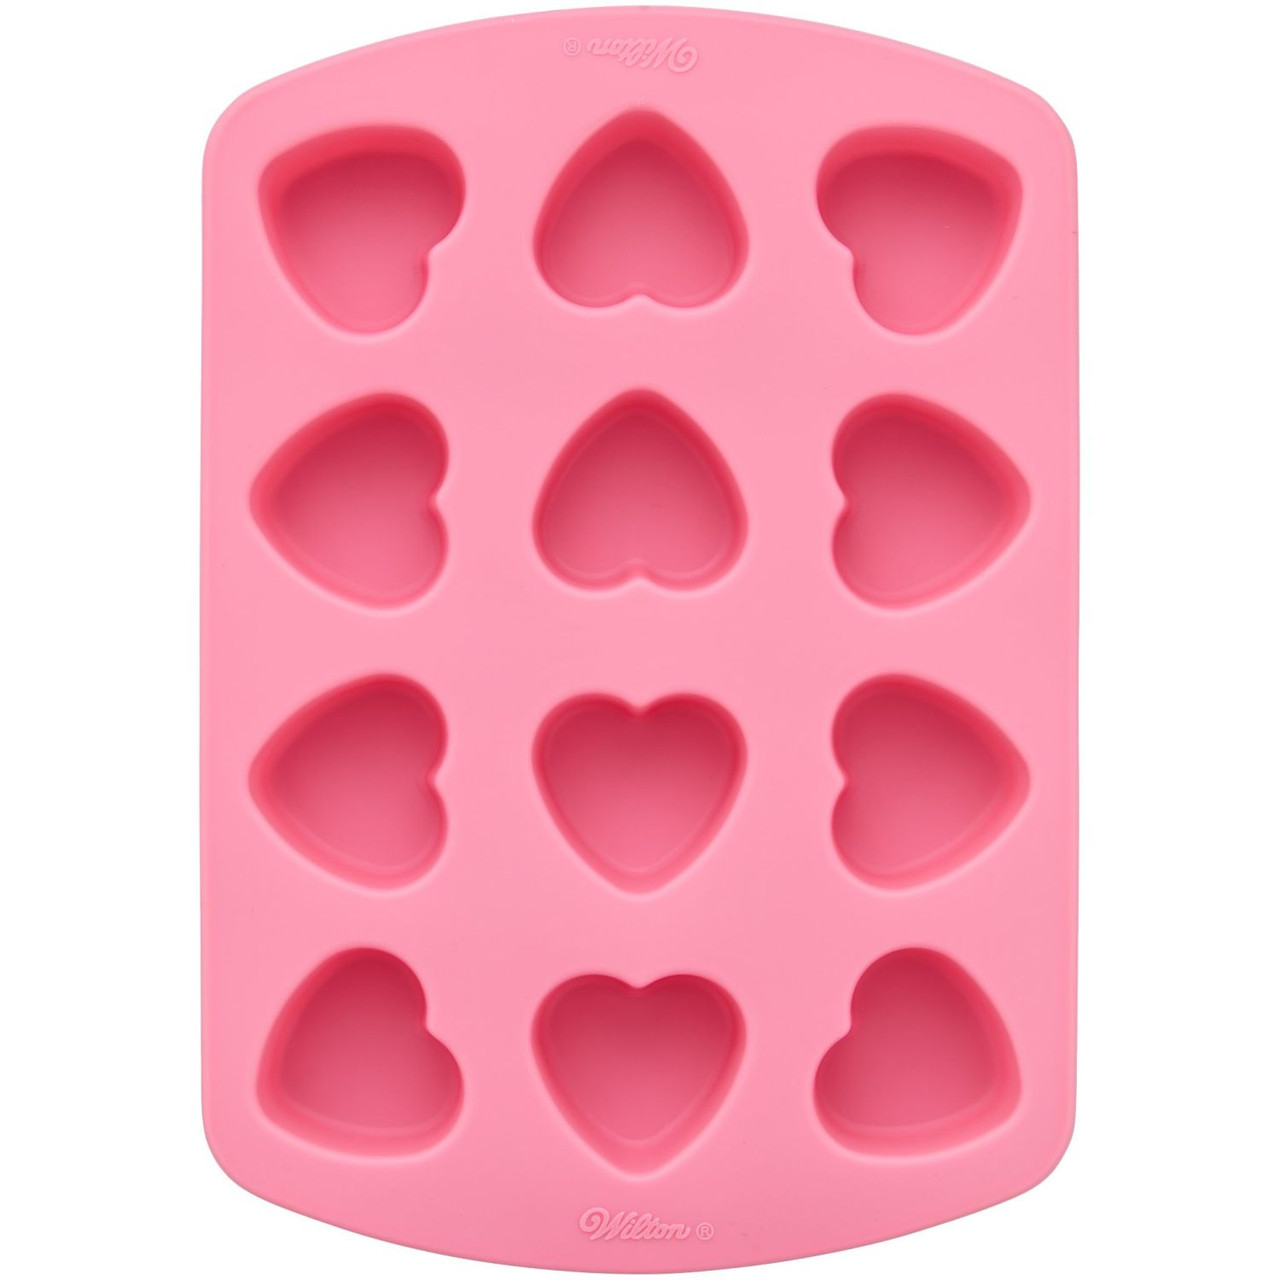 36 Pcs Silicone Muffin Mold, Baking Accessory, Non-Stick Cupcake Mold,  Individual Baking Mold, 4 Patterns Round Star Flower Heart, 6 Color, Easy